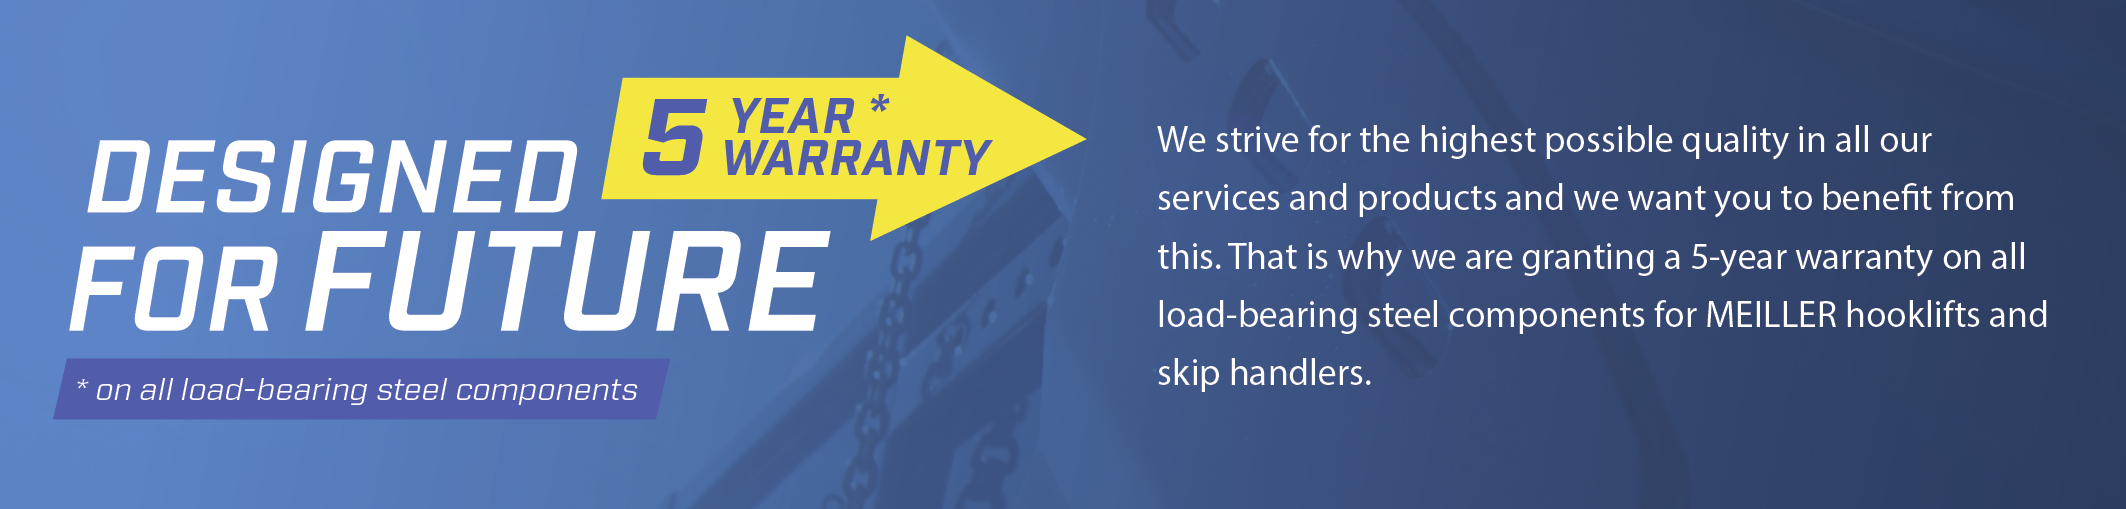 We strive for the highest possible quality in all our services and products and we want you to benefit from this. That is why we are granting a 5-year warranty on all load-bearing steel components for MEILLER hooklifts and skip loaders.